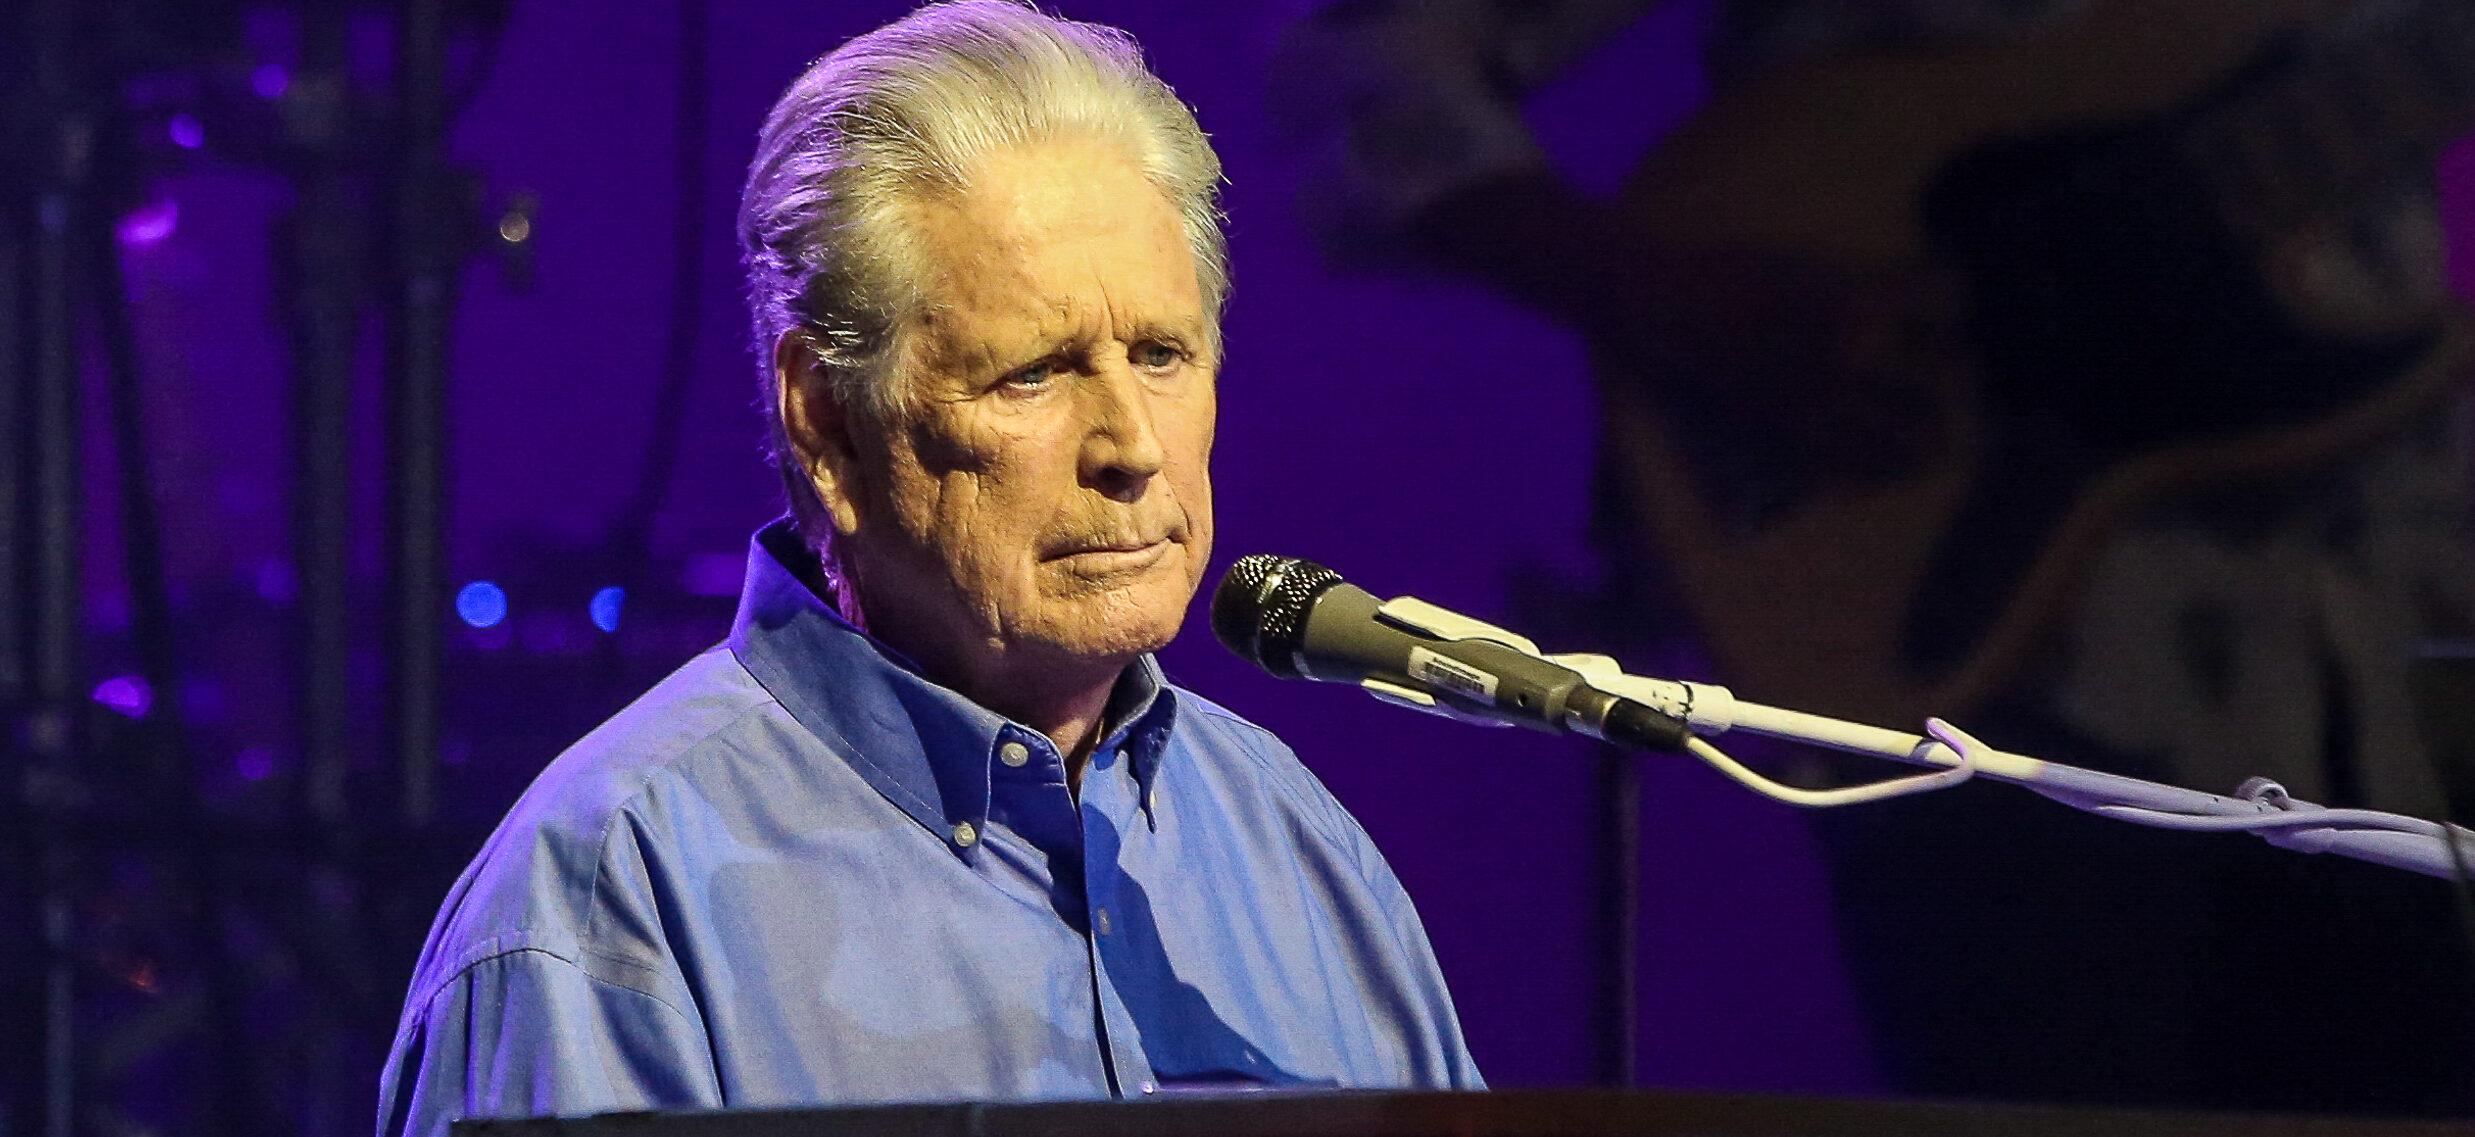 Brian Wilson’s Minor Kids Set To Be Appointed Guardians Following His Conservatorship